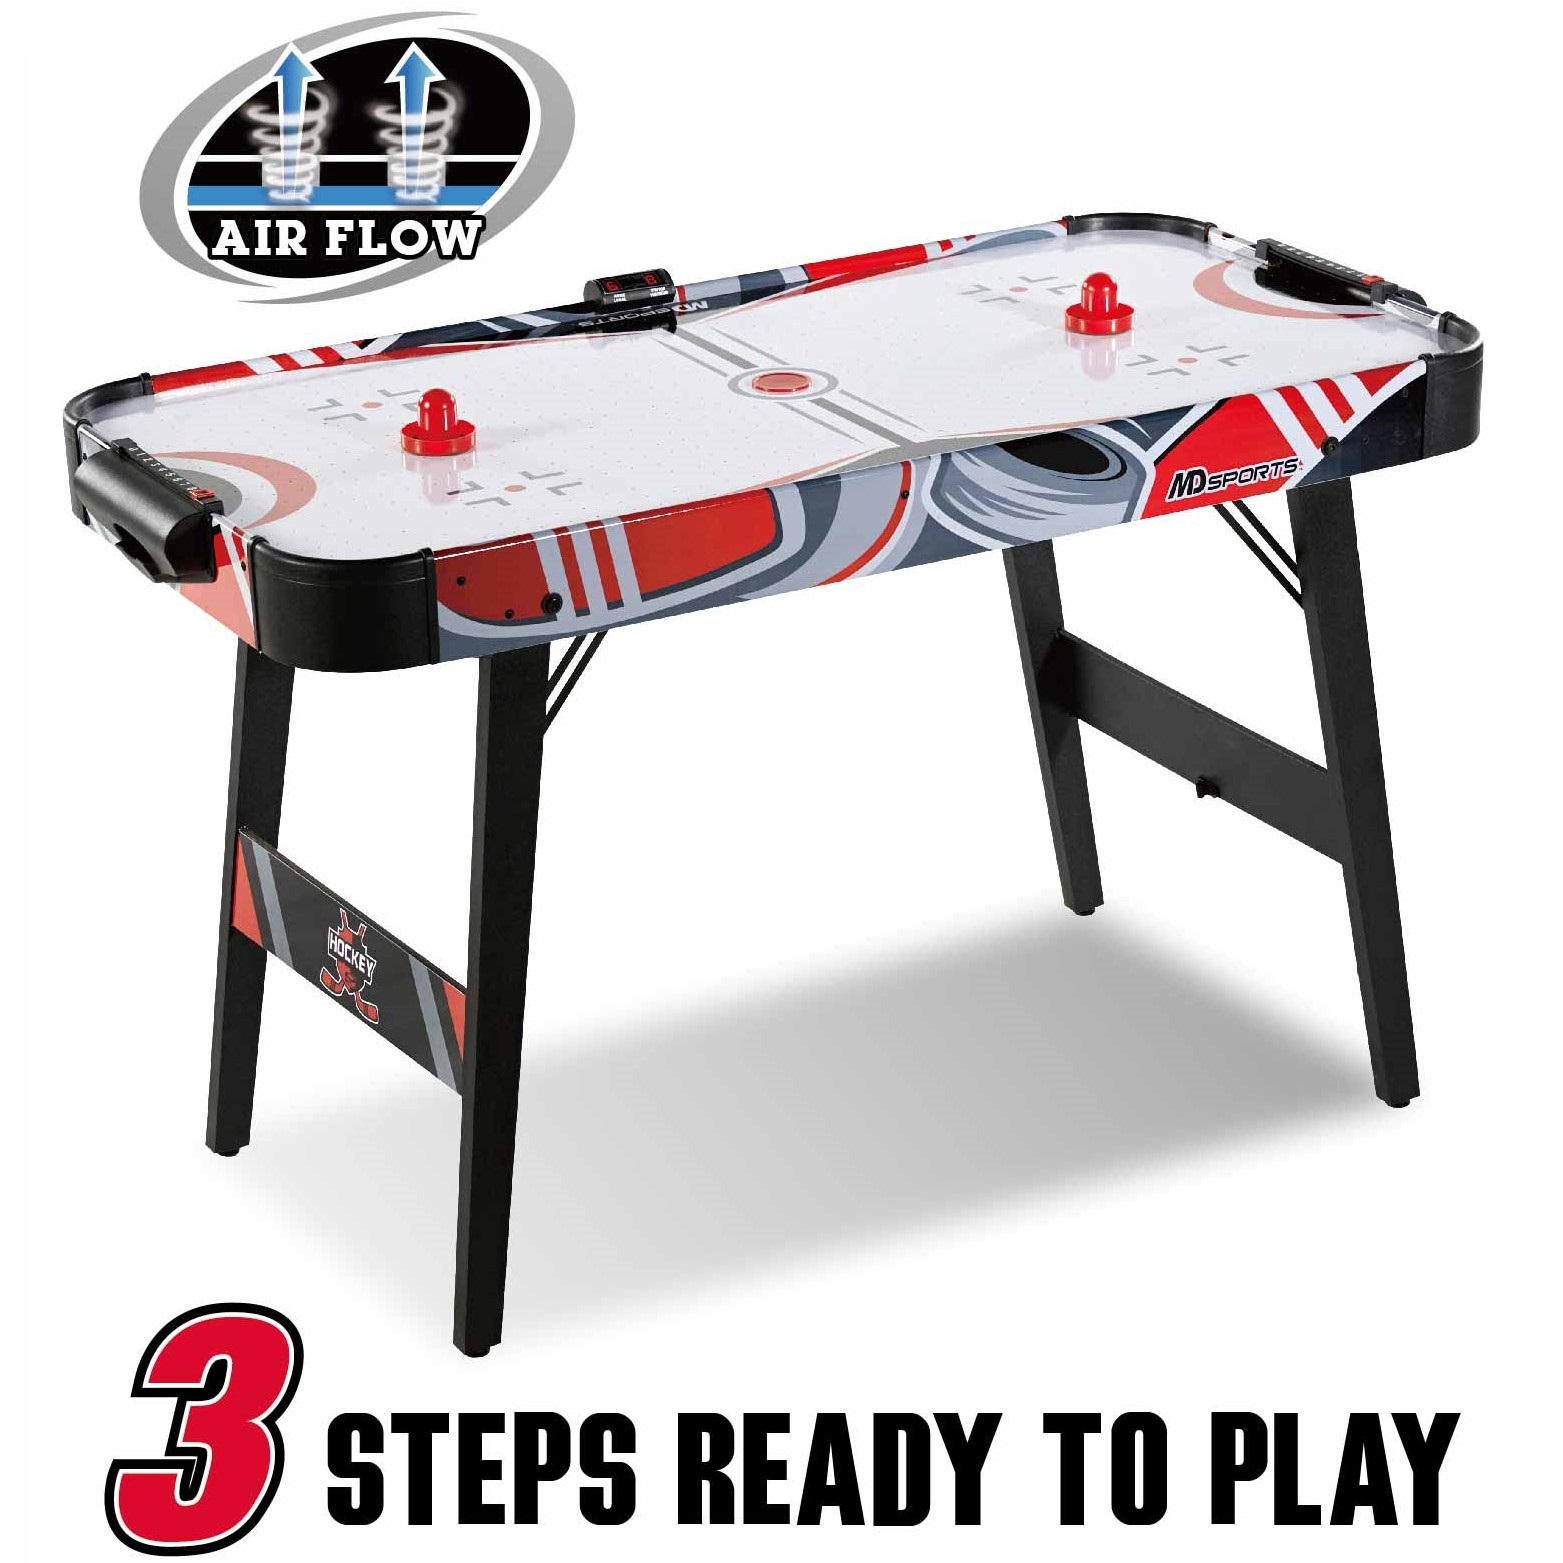 Price drop! MD Sports easy assembly 48-inch air powered hockey table for $10